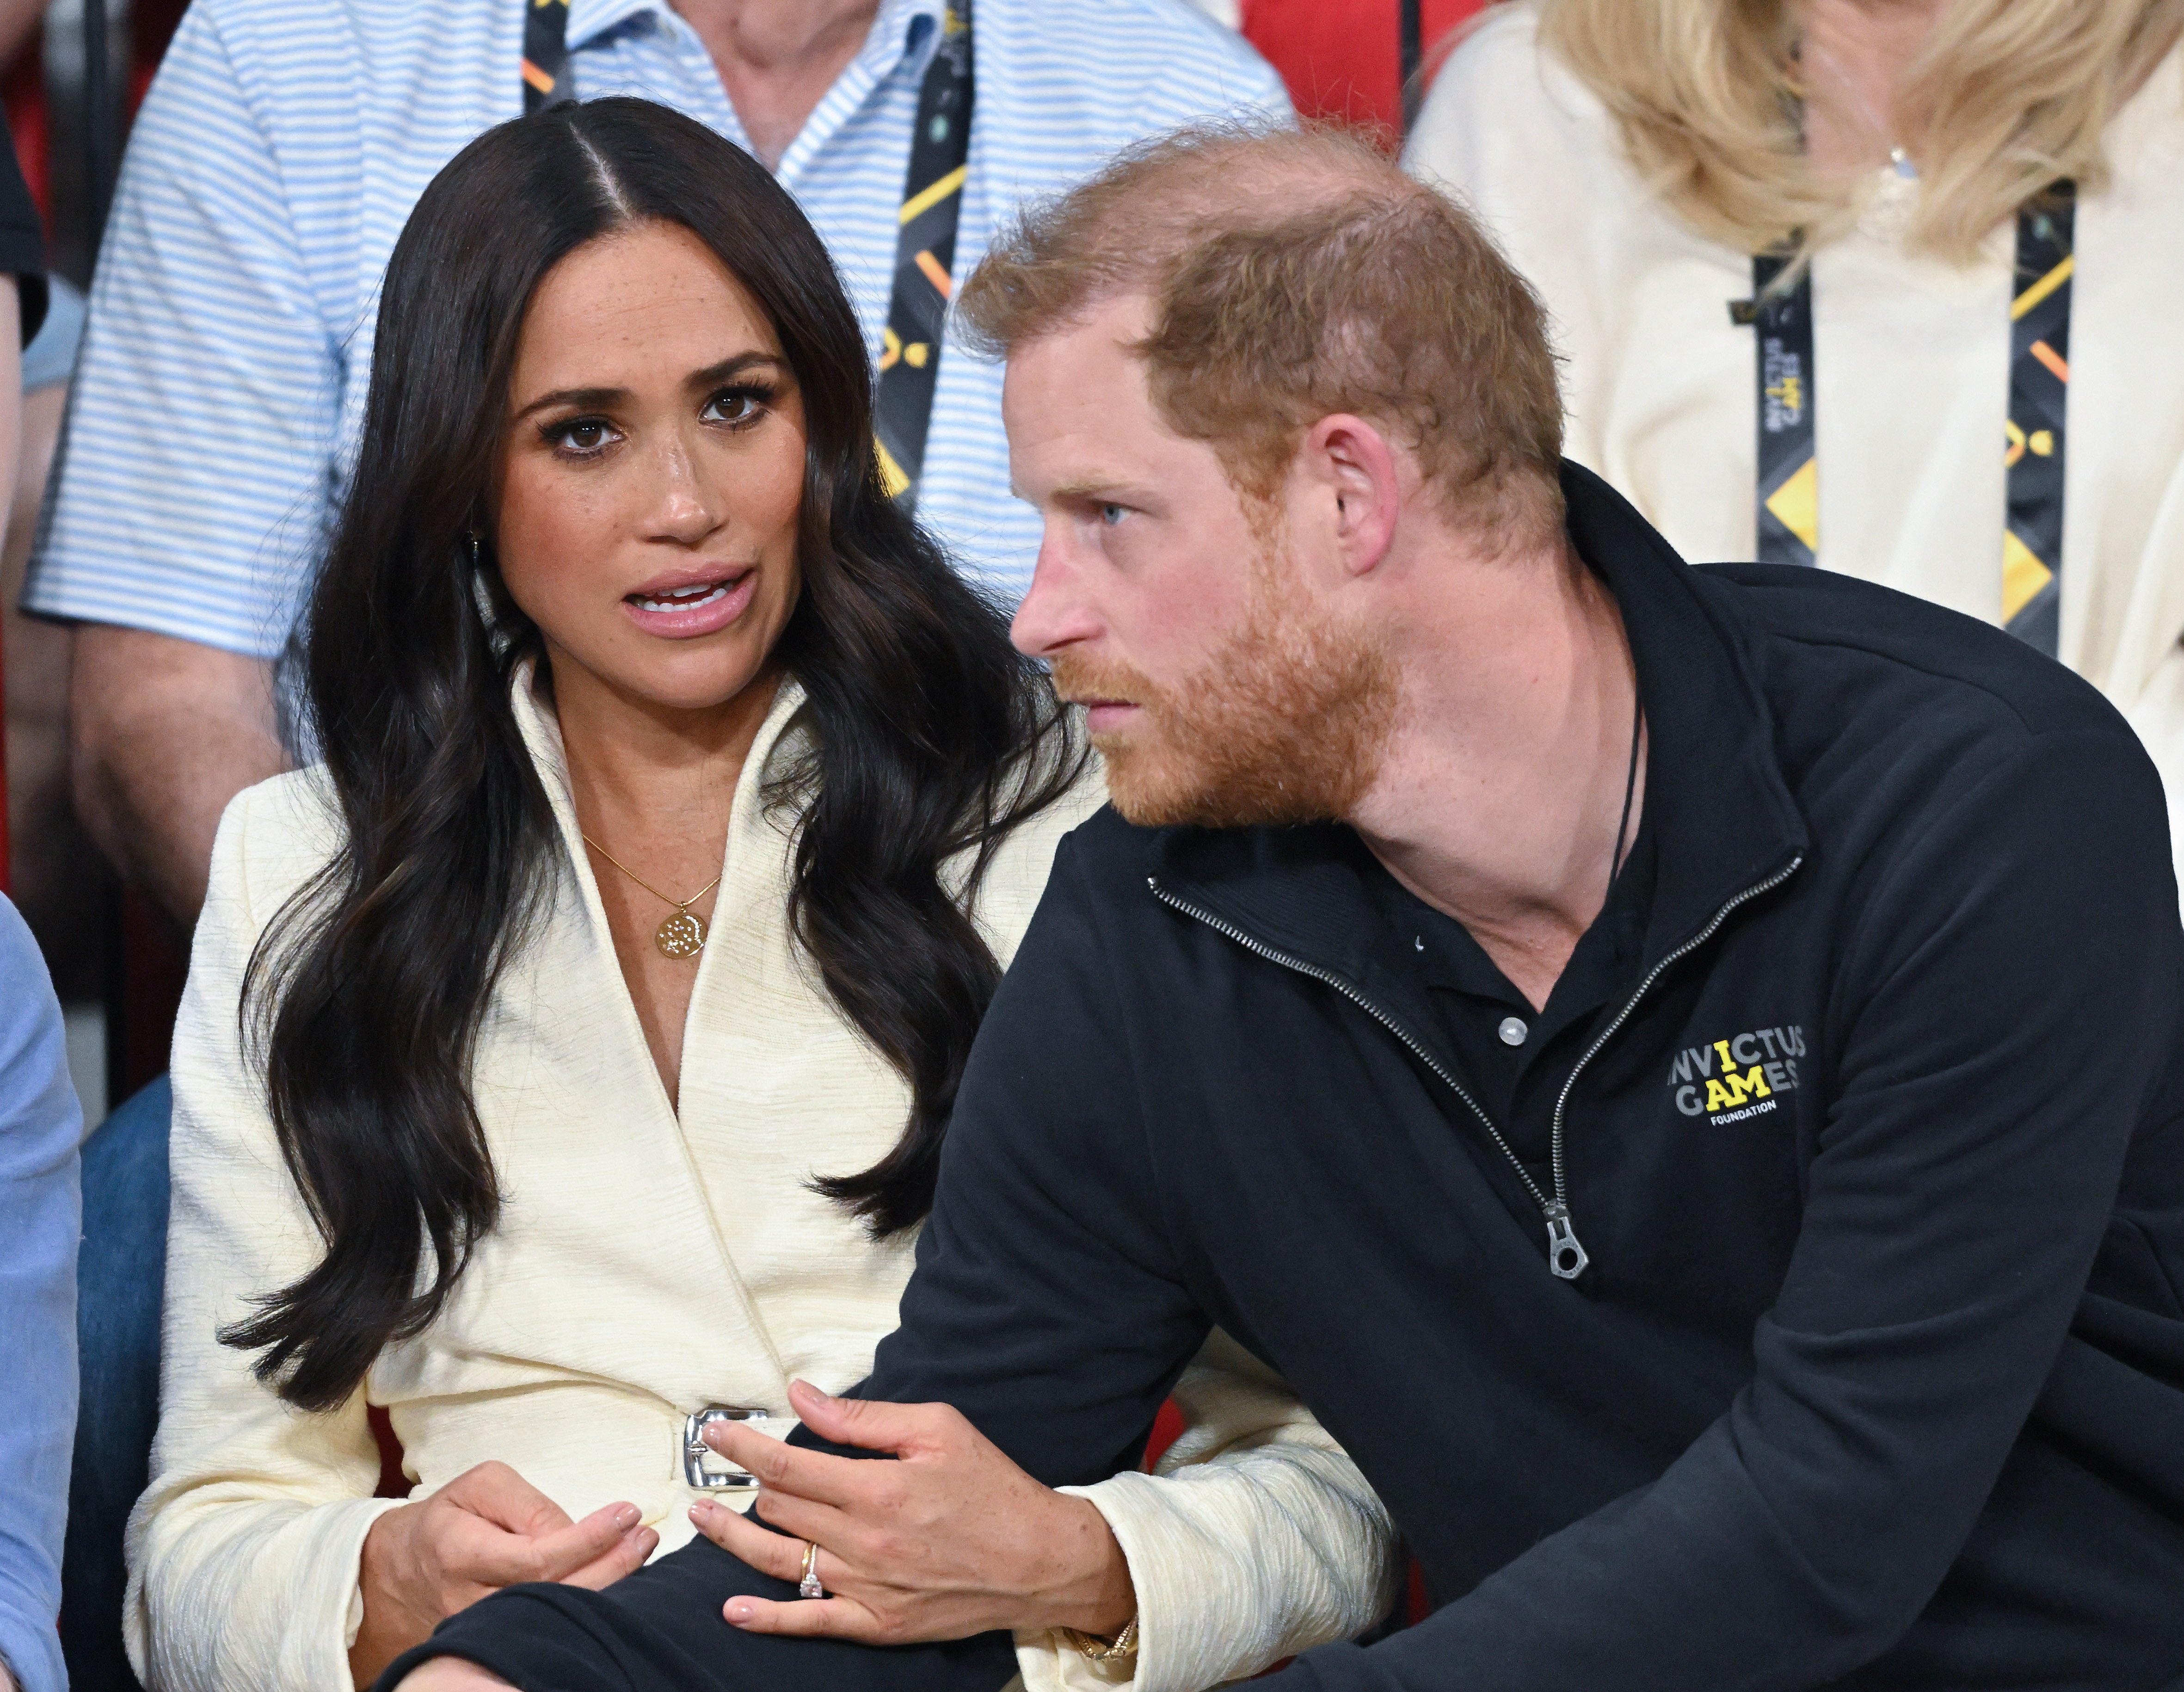 Meghan Markle speaking with Prince Harry at the Invictus Games sitting volleyball event